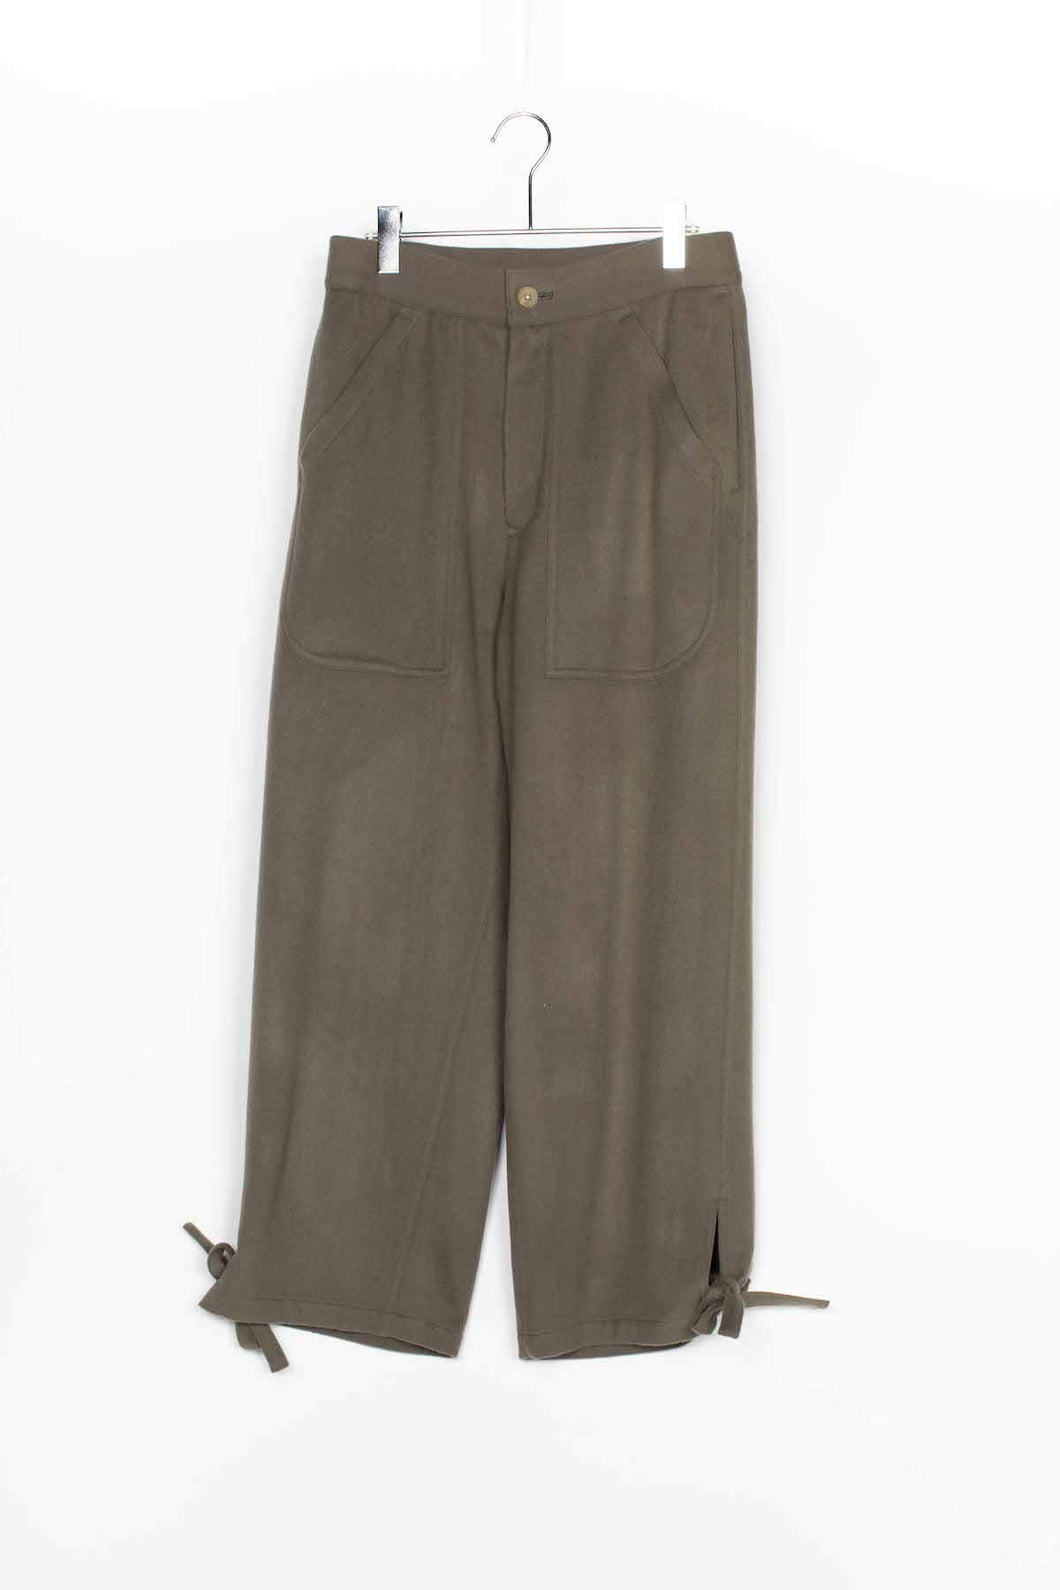 MILITARY BELTED PANTS